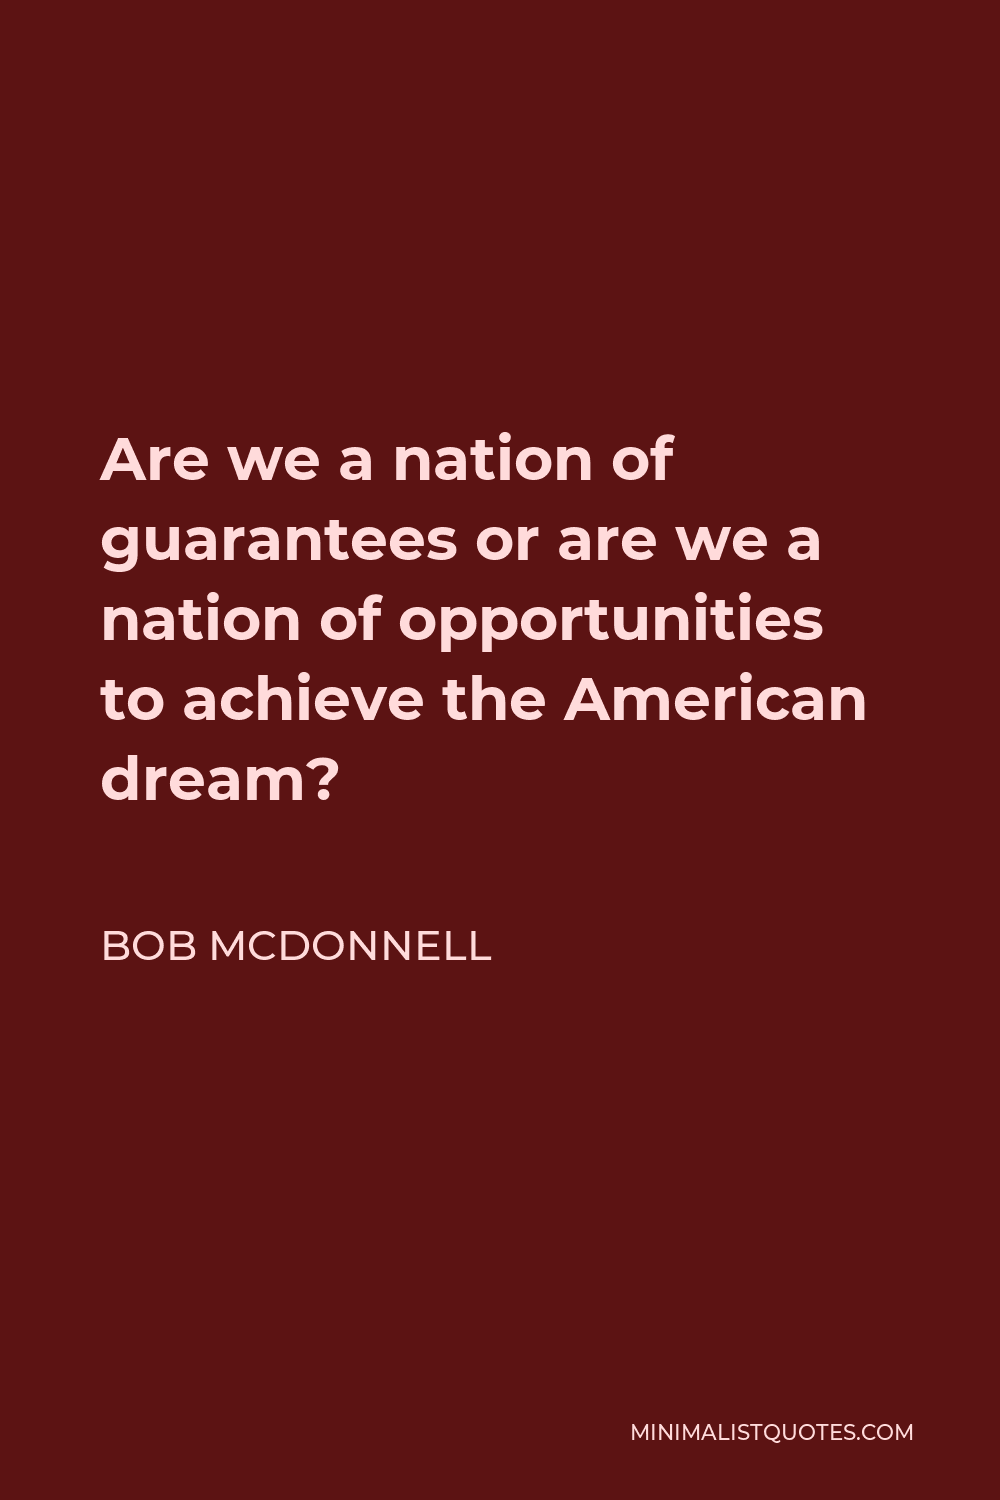 Bob McDonnell Quote - Are we a nation of guarantees or are we a nation of opportunities to achieve the American dream?